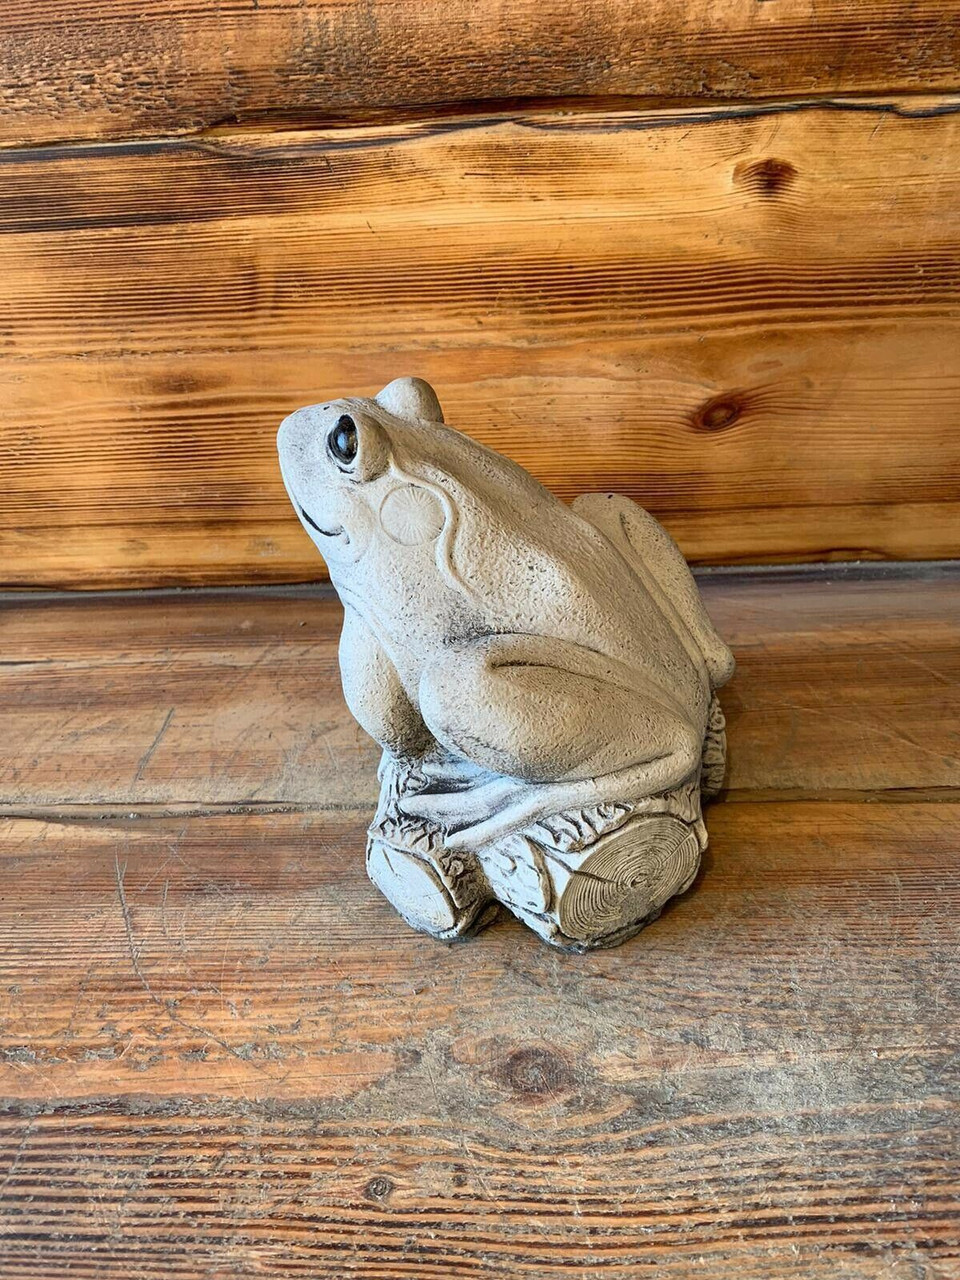 STONE GARDEN FROG/TOAD ON LOG GIFT  CONCRETE ORNAMENT